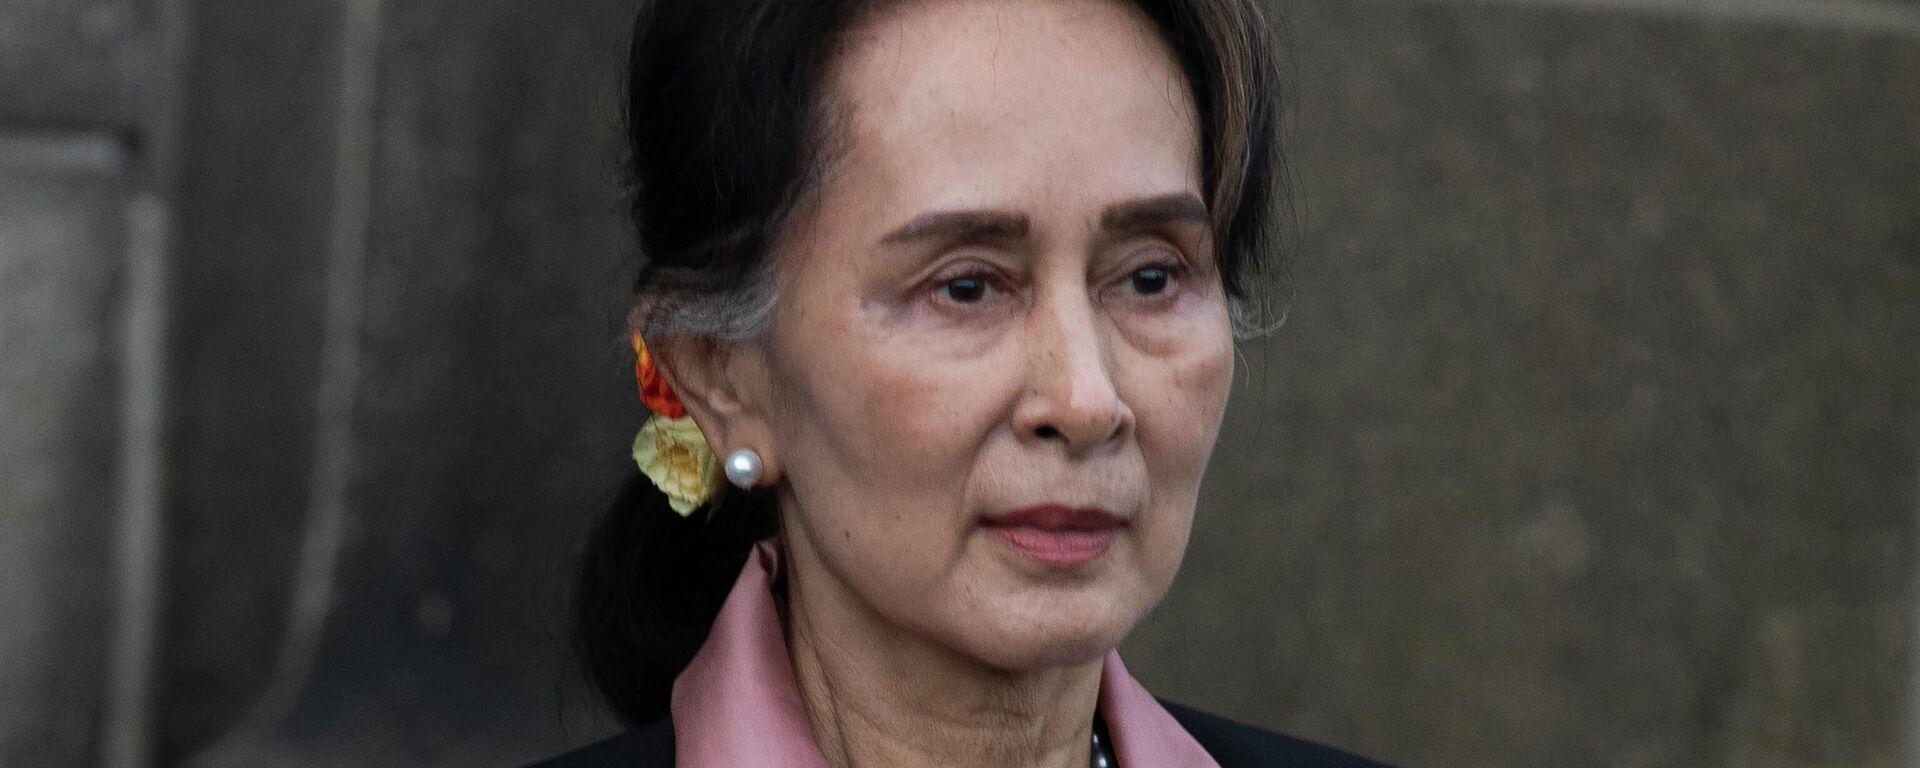 Myanmar's leader Aung San Suu Kyi leaves the International Court of Justice after the first day of three days of hearings in The Hague, Netherlands, on Dec. 10, 2019 - Sputnik International, 1920, 23.06.2022